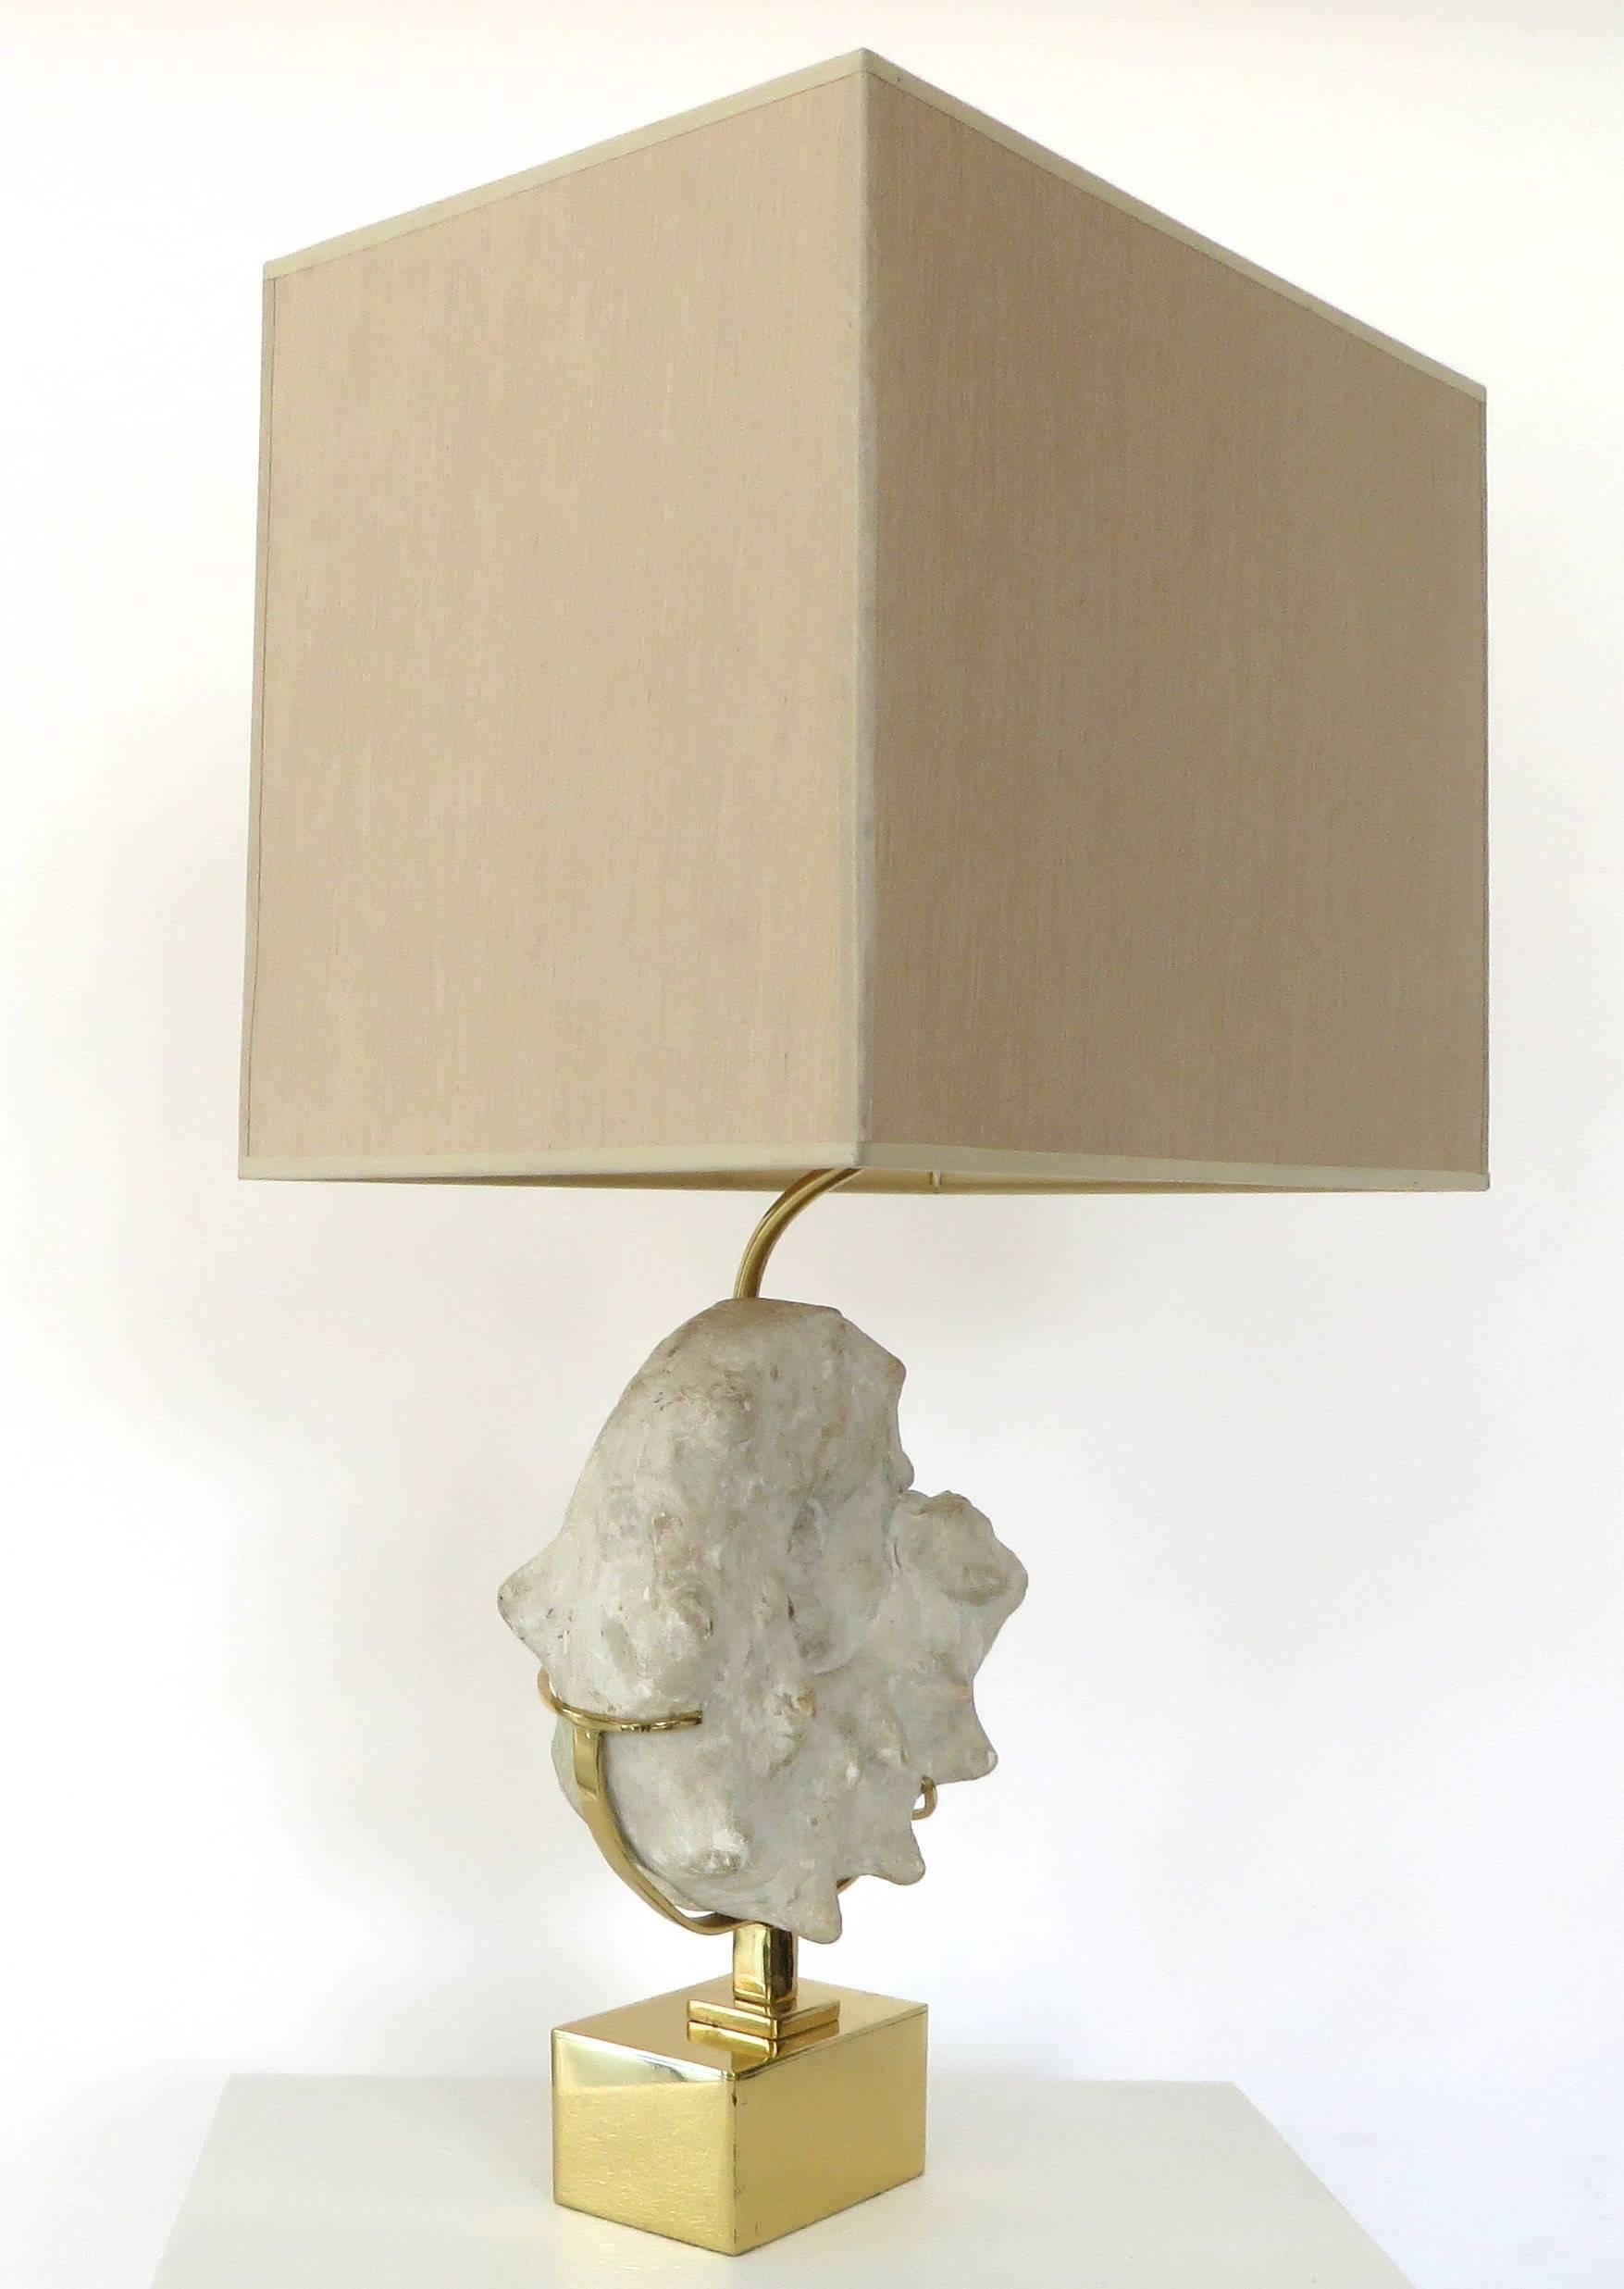 A 1970's, in the style of Willy Daro mounted Ammonite specimen lamp with taupe silk shade on brass base. Ammonites are an extinct group of marine invertebrate animals in the subclass Ammonoidea of the class Cephalopoda. 
Overall dimensions with